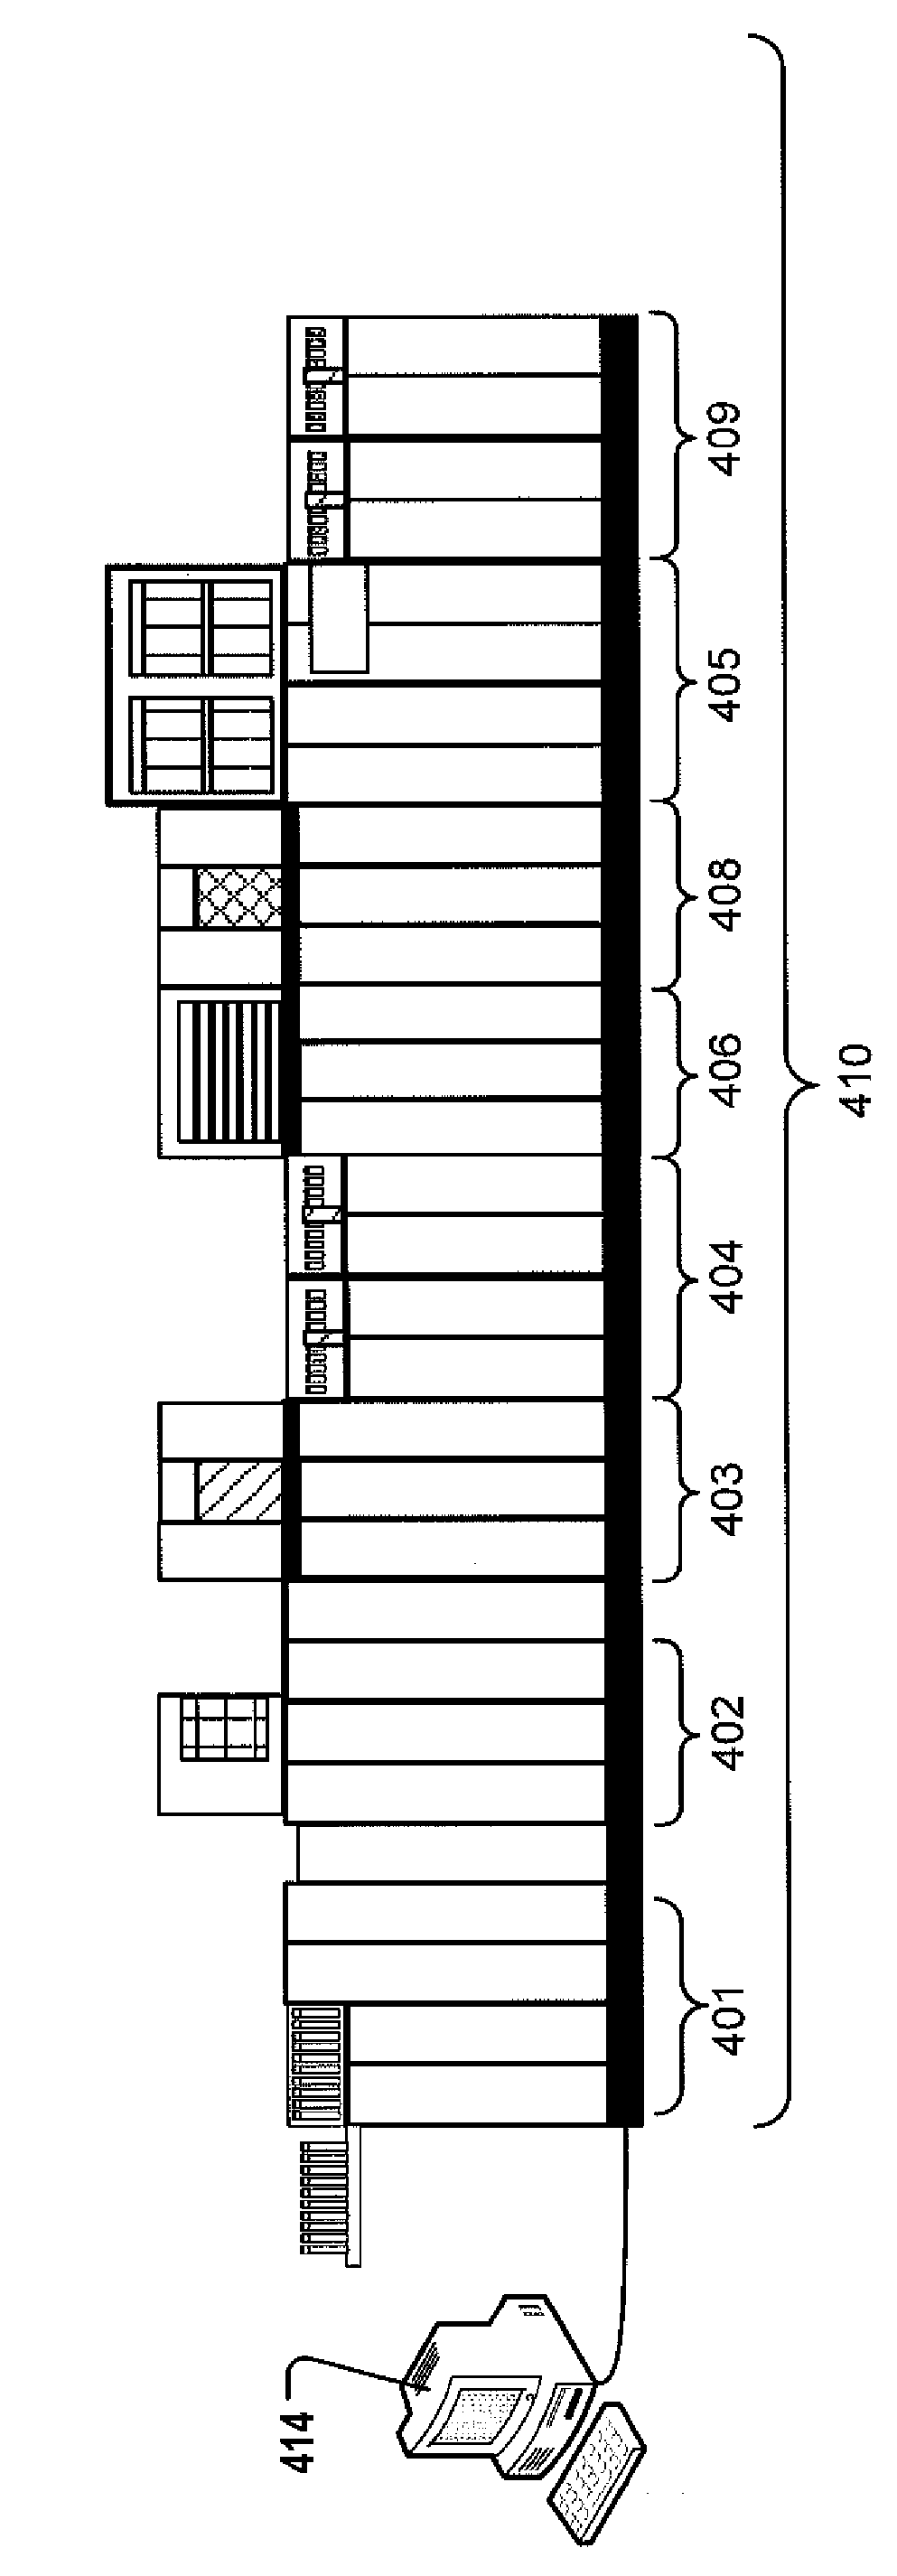 Method for operating automated sample workcell